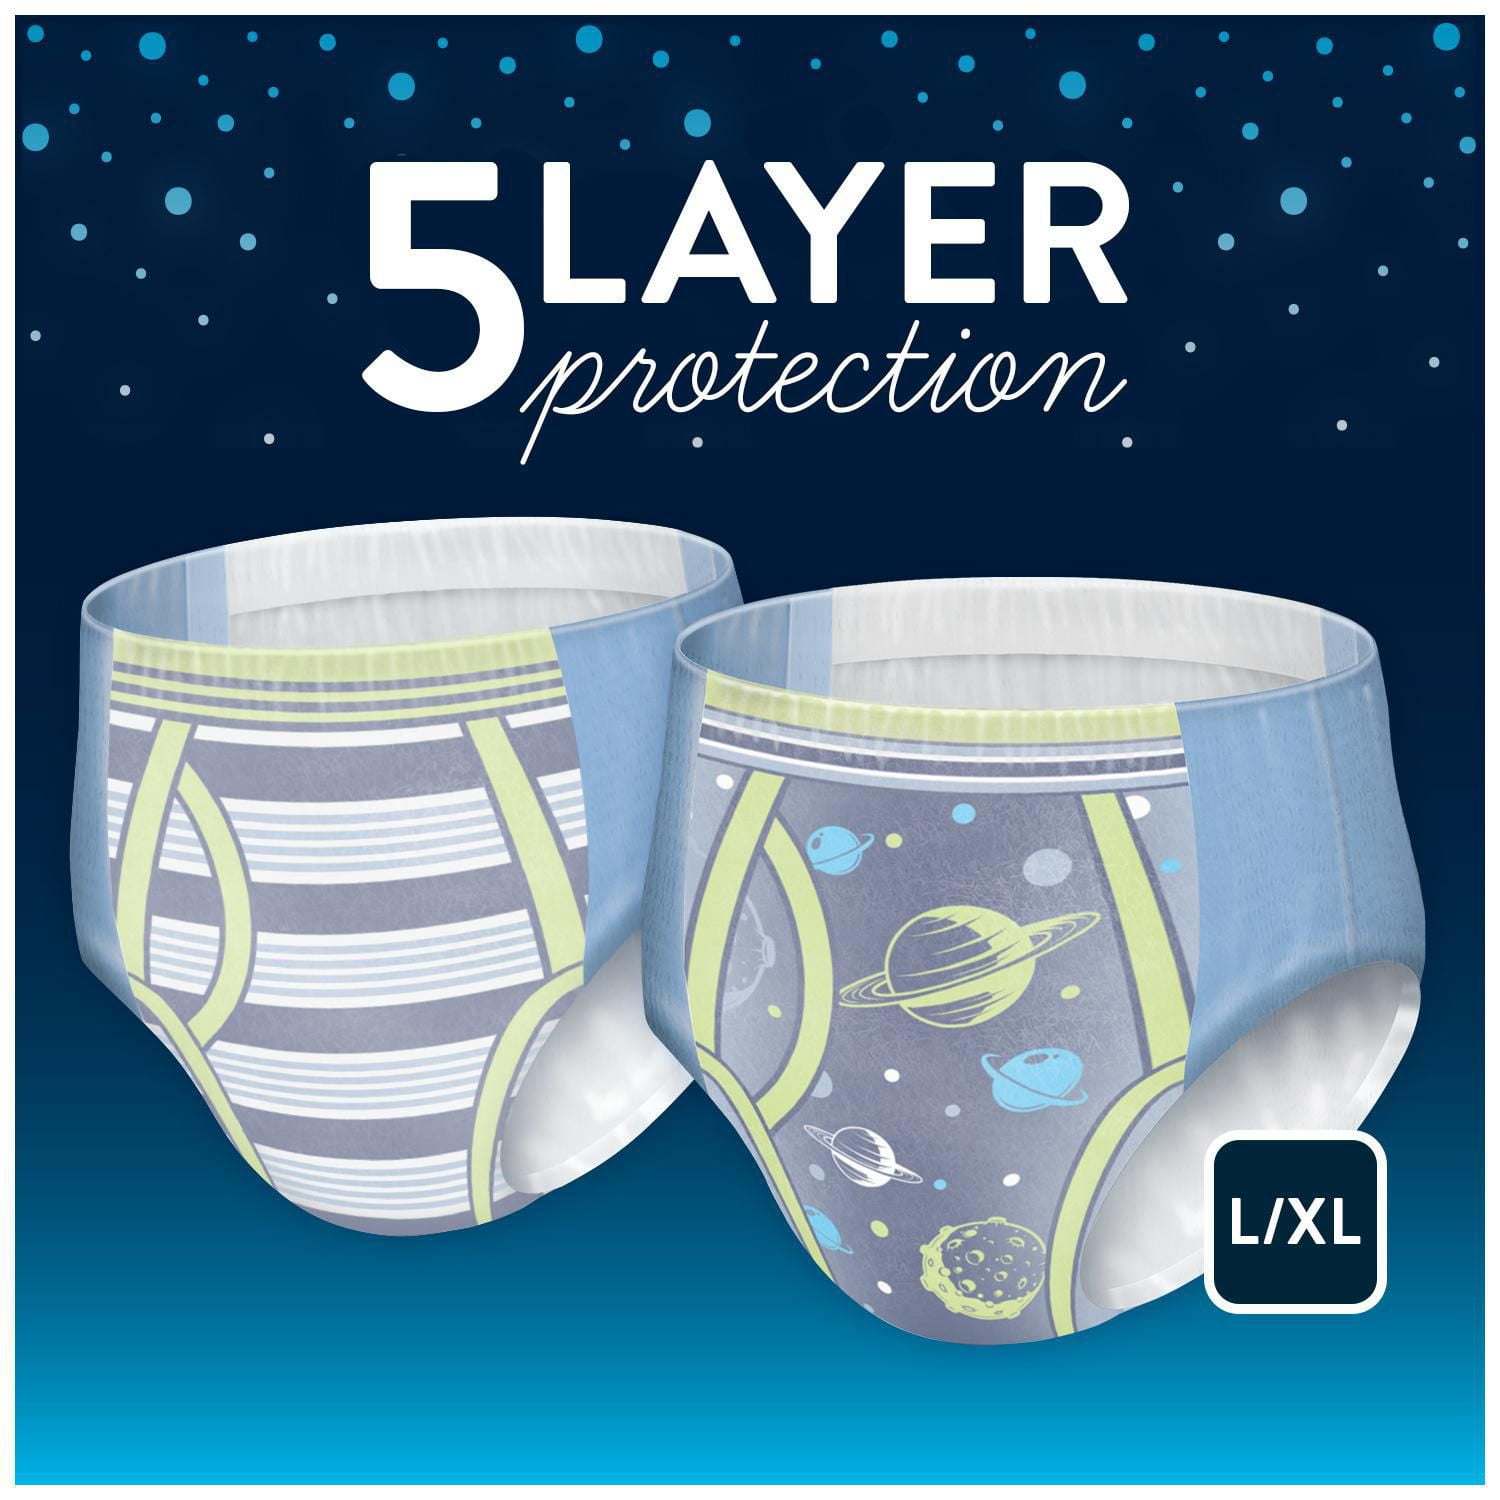 Basics For Kids Underwear, Nighttime, Boys, Large/Extra Large (60-125 lb), Diapers & Training Pants